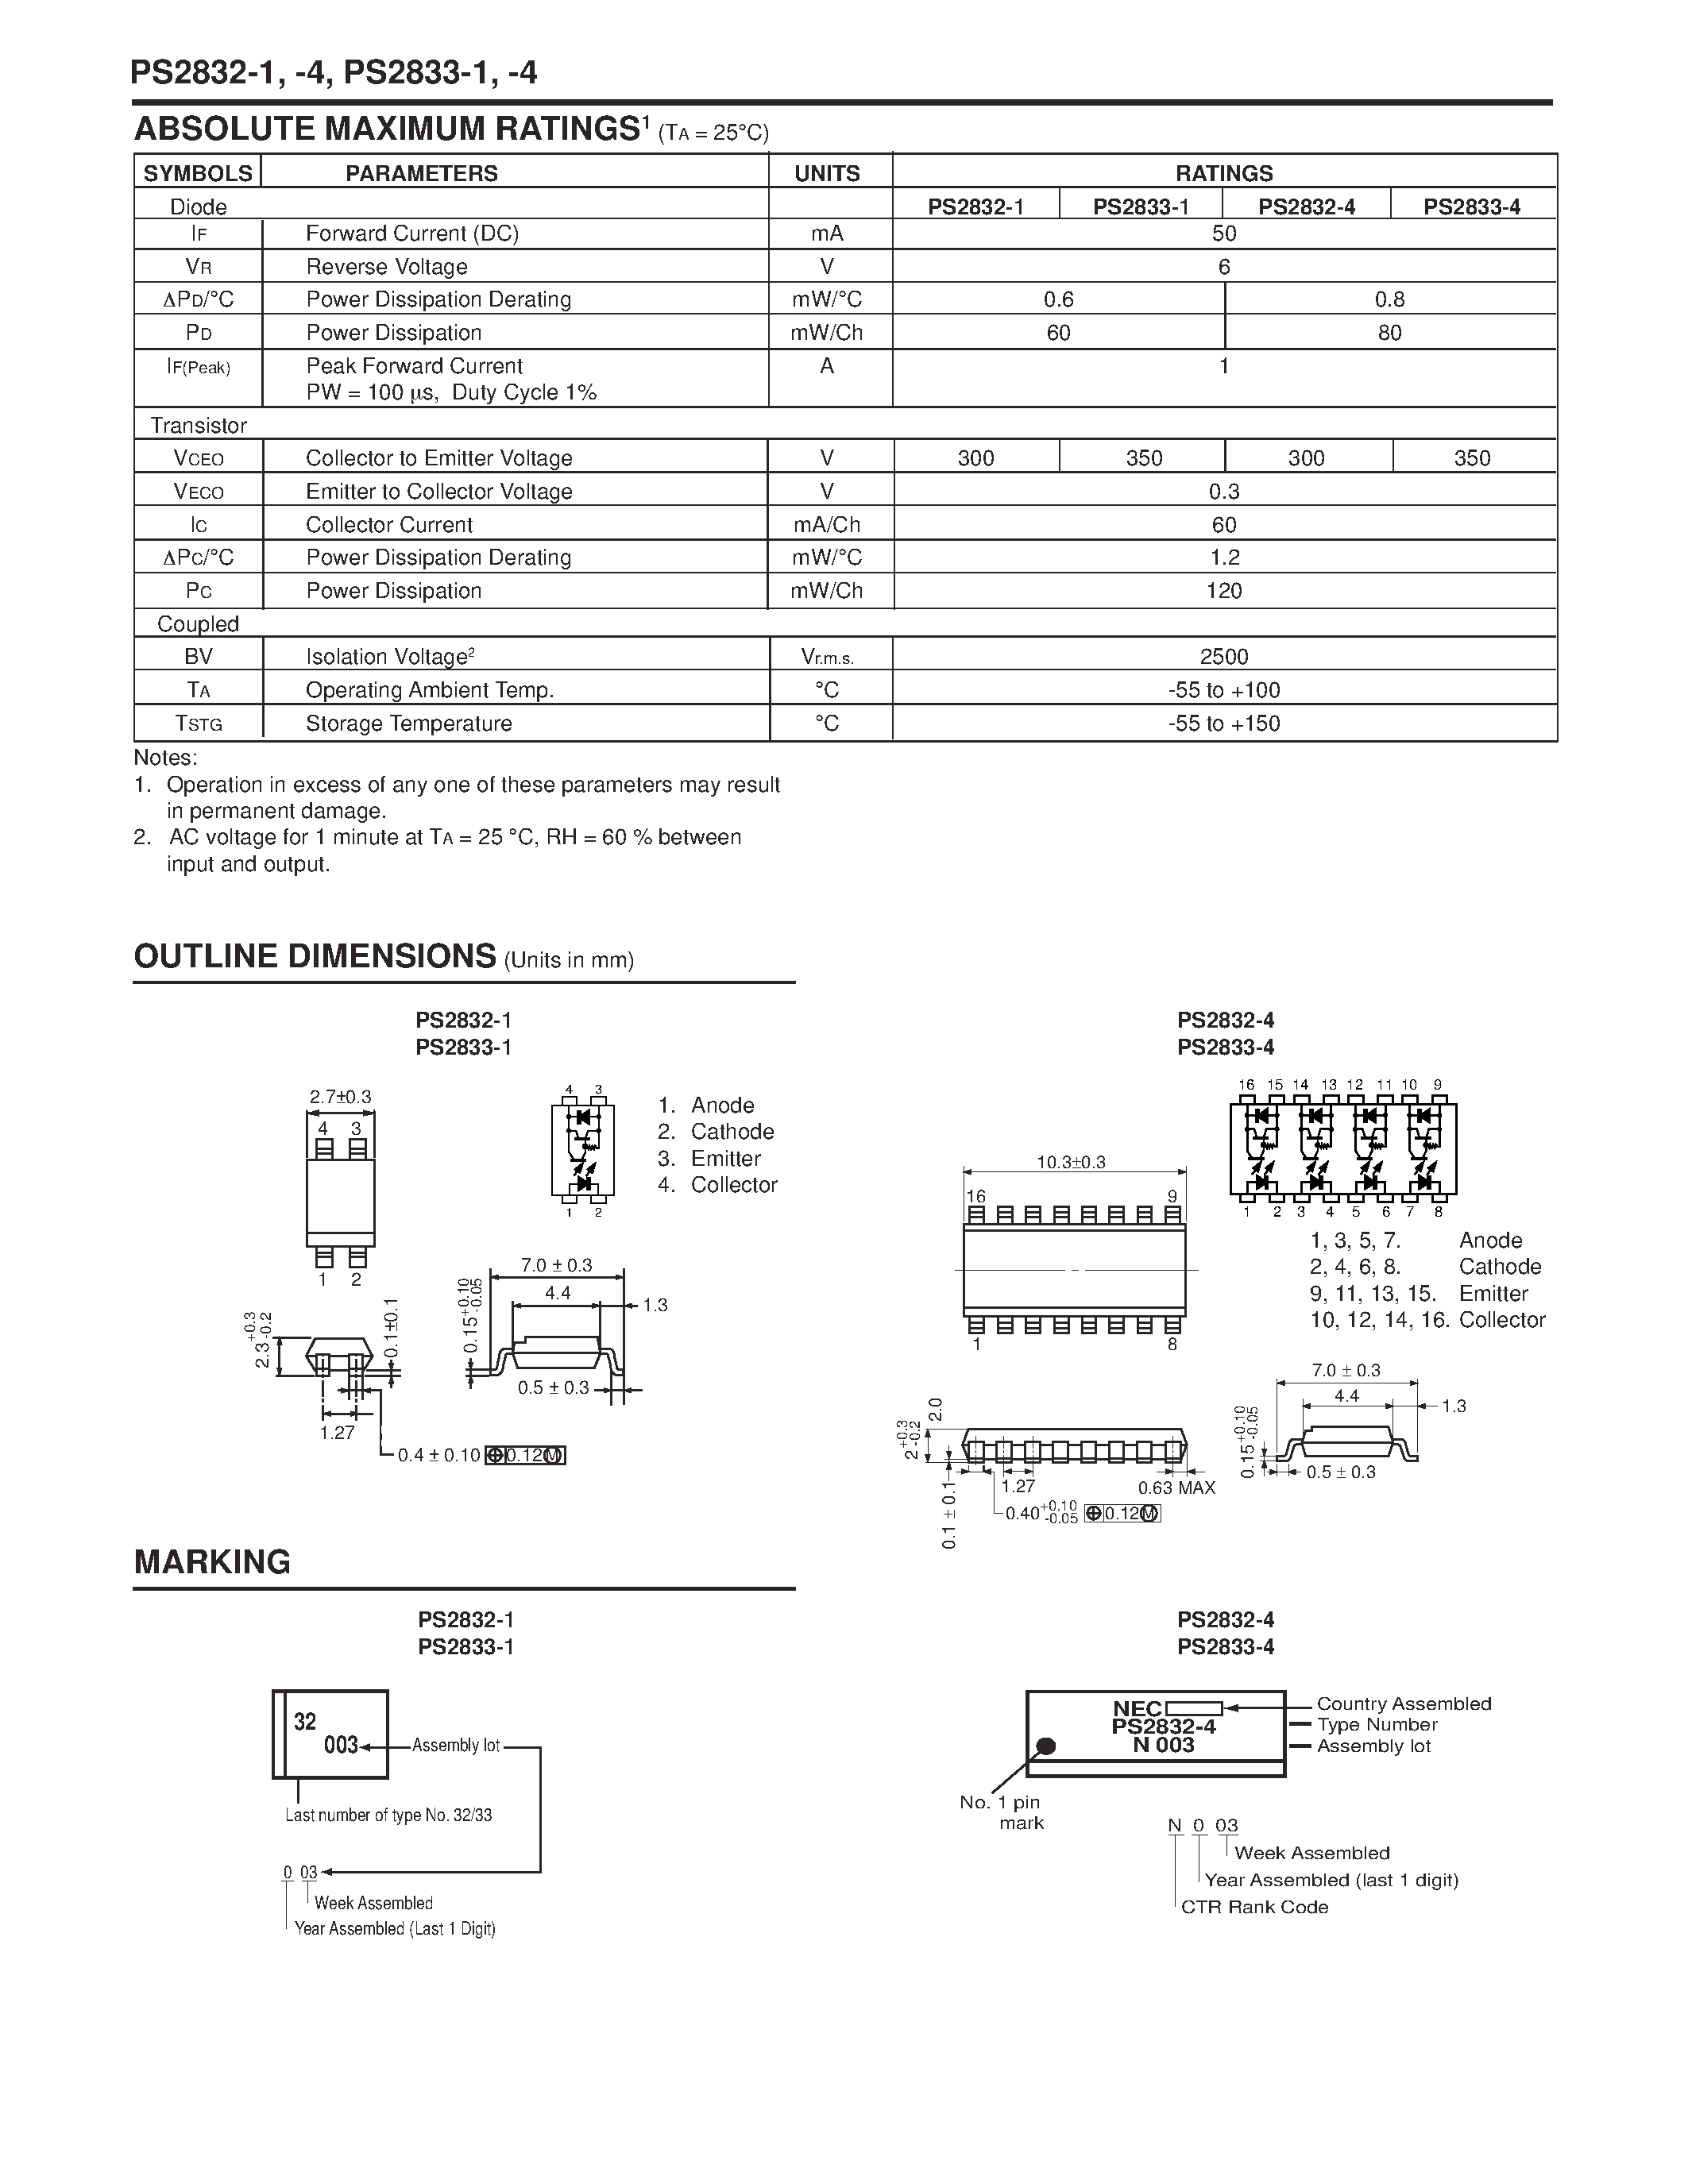 Datasheet PS2833-4-V-F4 - HIGH ISOLATION VOLTAGE HIGH COLLECTOR TO EMITTER VOLTAGE SOP MULTI OPTOCOUPLER page 2